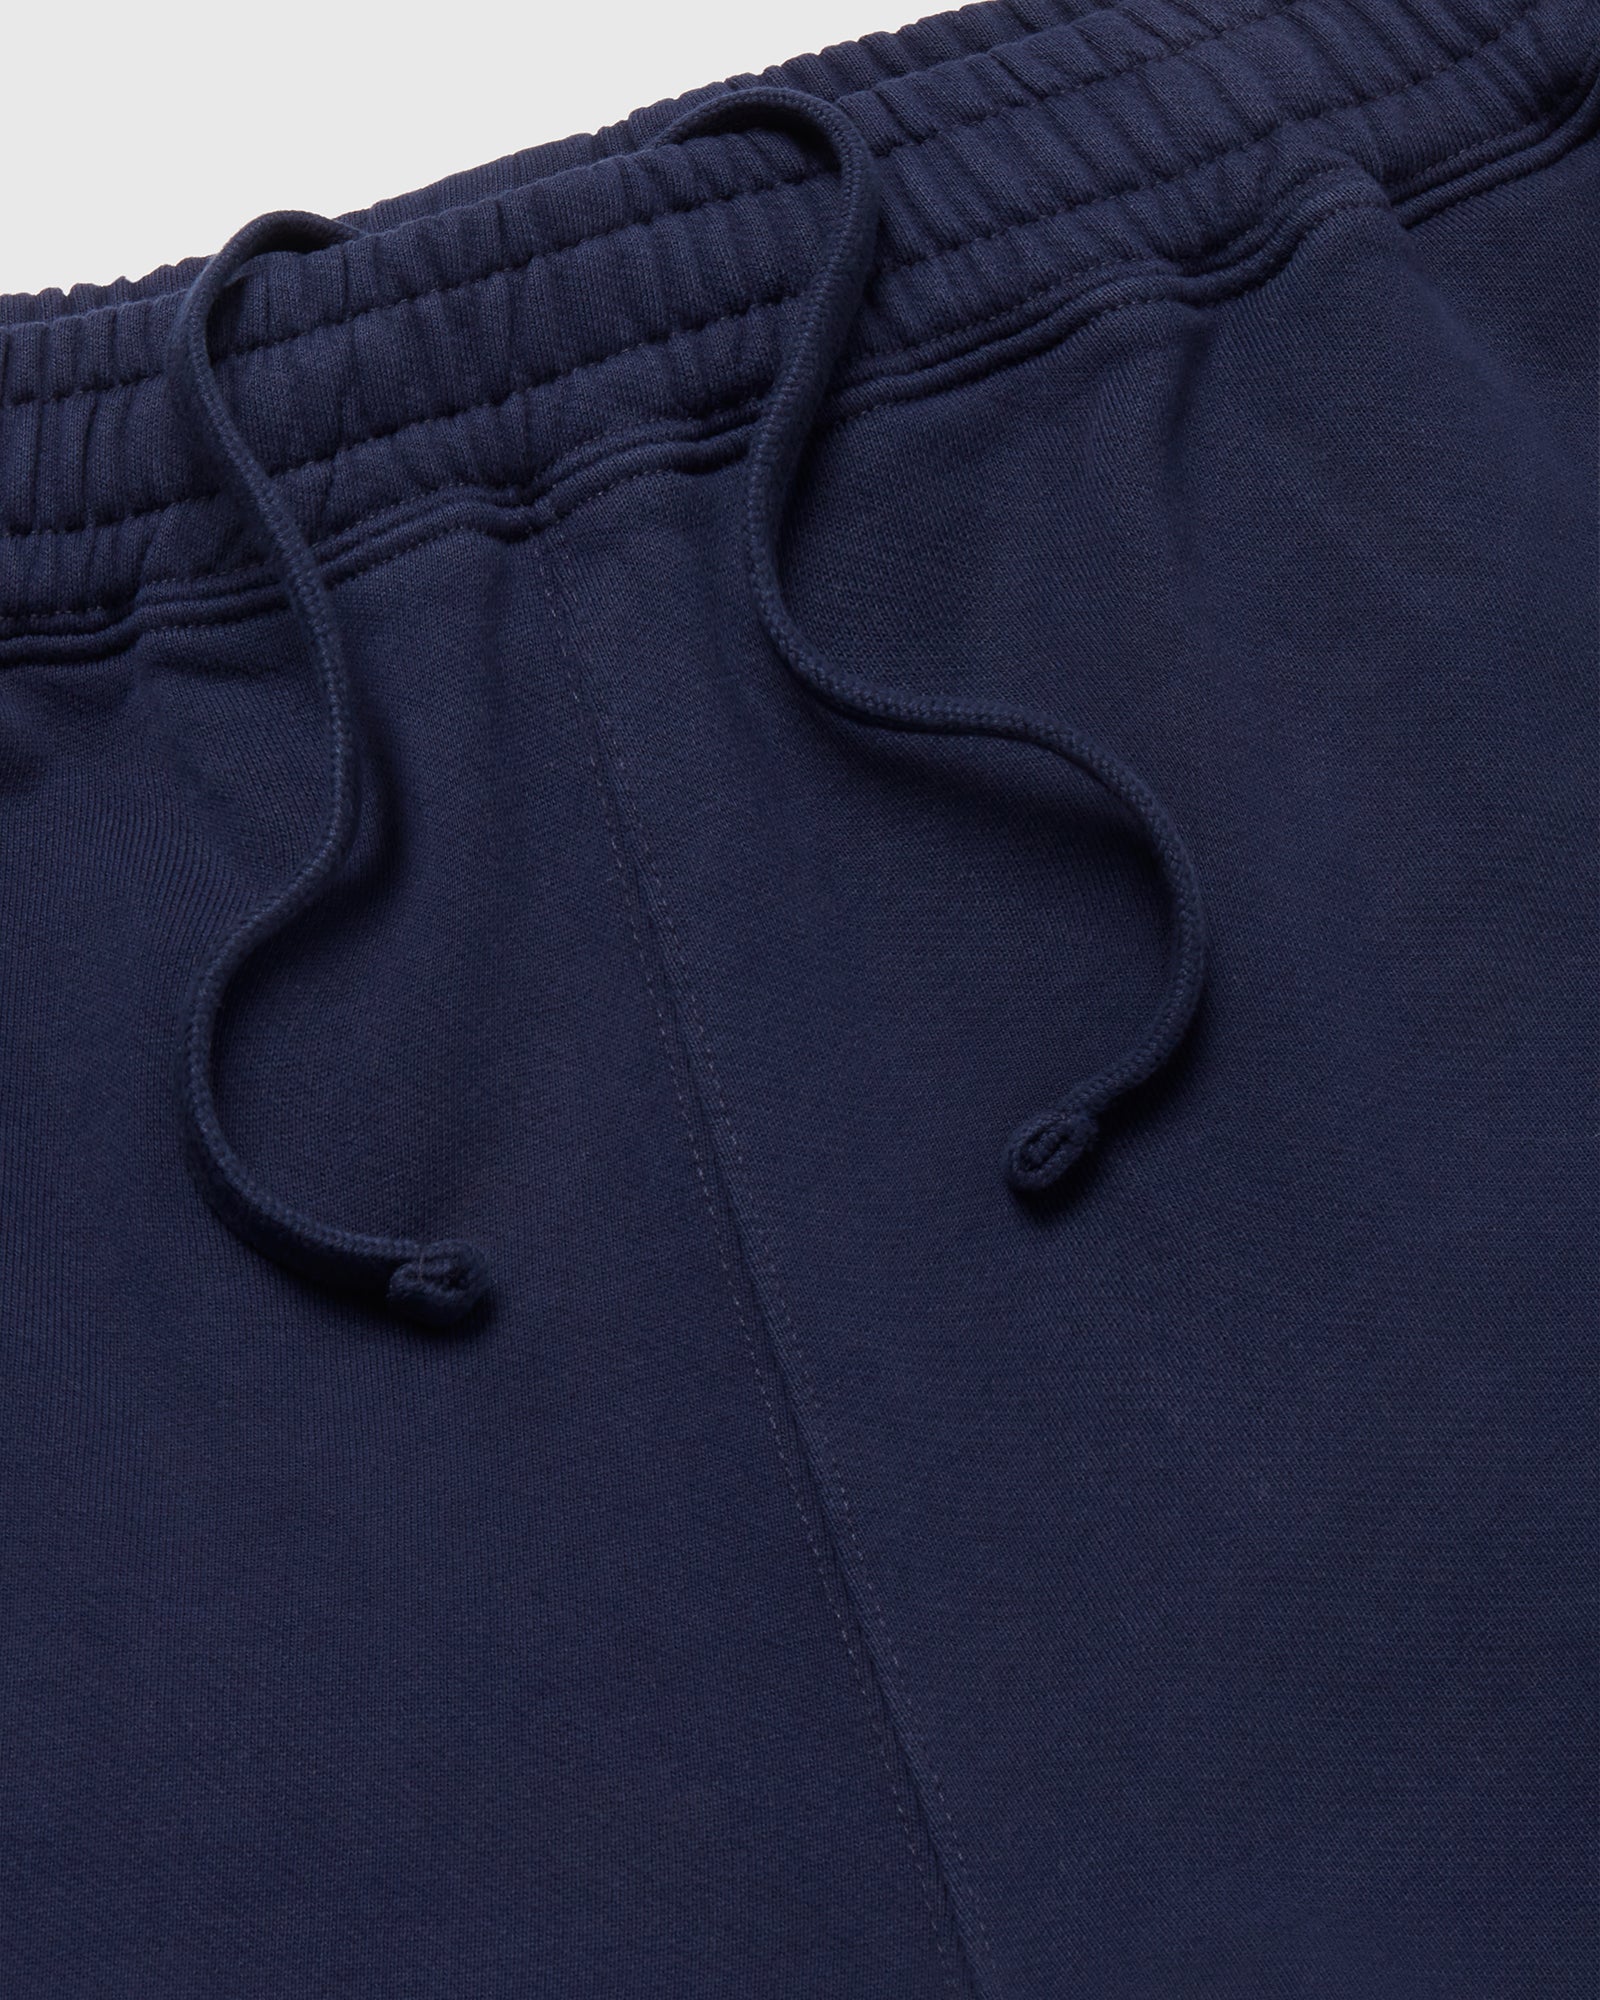 French Terry Open Hem Sweatpant - Navy